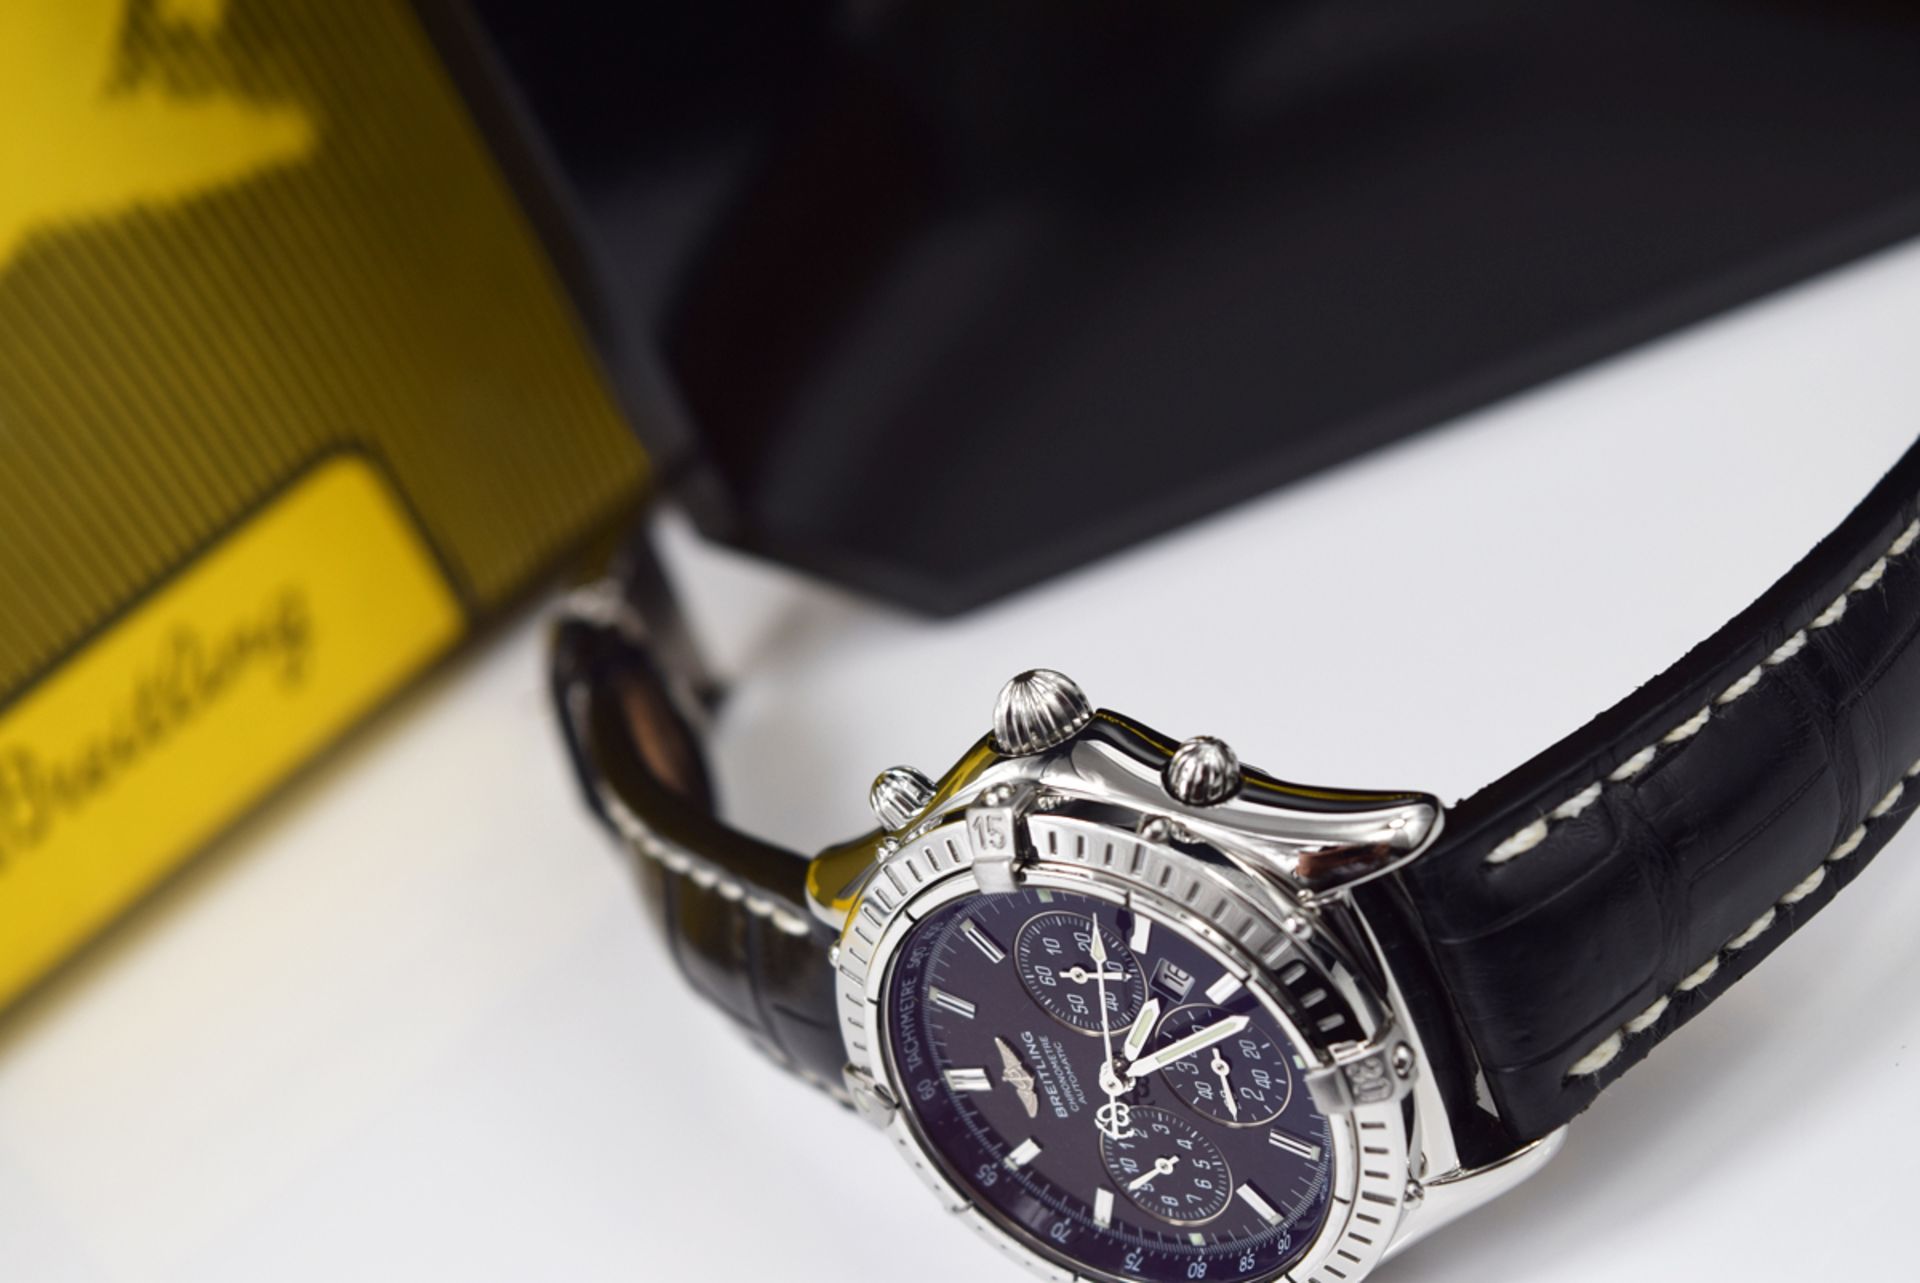 BREITLING - SHADOW FLYBACK / CHRONOGRAPH in STEEL - Image 4 of 11